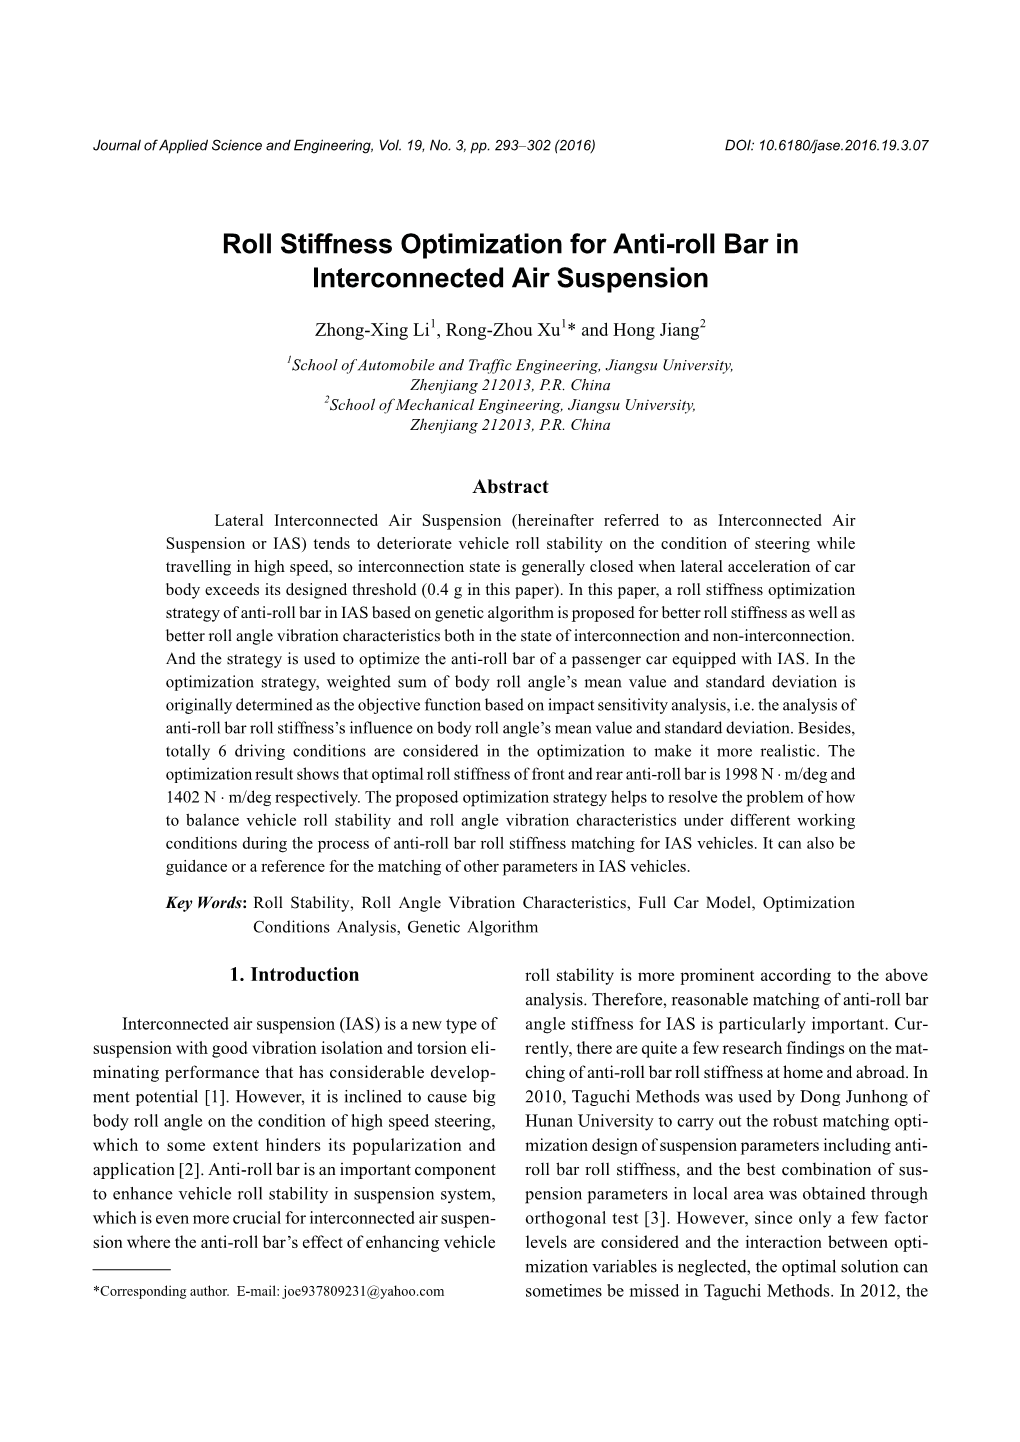 Roll Stiffness Optimization for Anti-Roll Bar in Interconnected Air Suspension